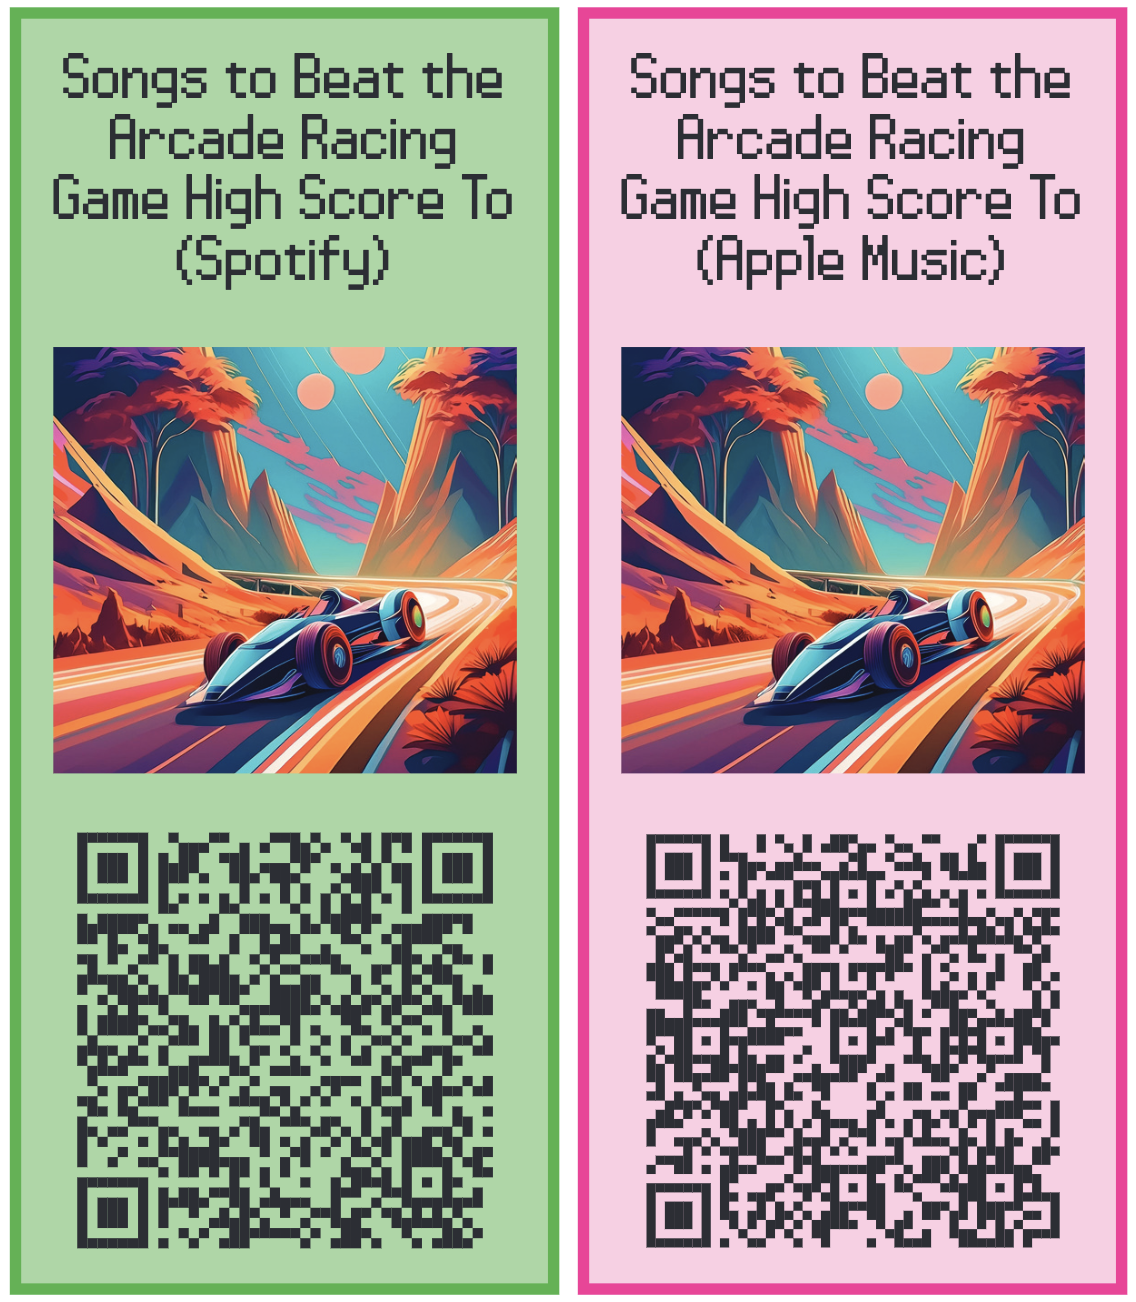 Pictures of two QR codes, which link to the playlist in Spotify and Apple Music